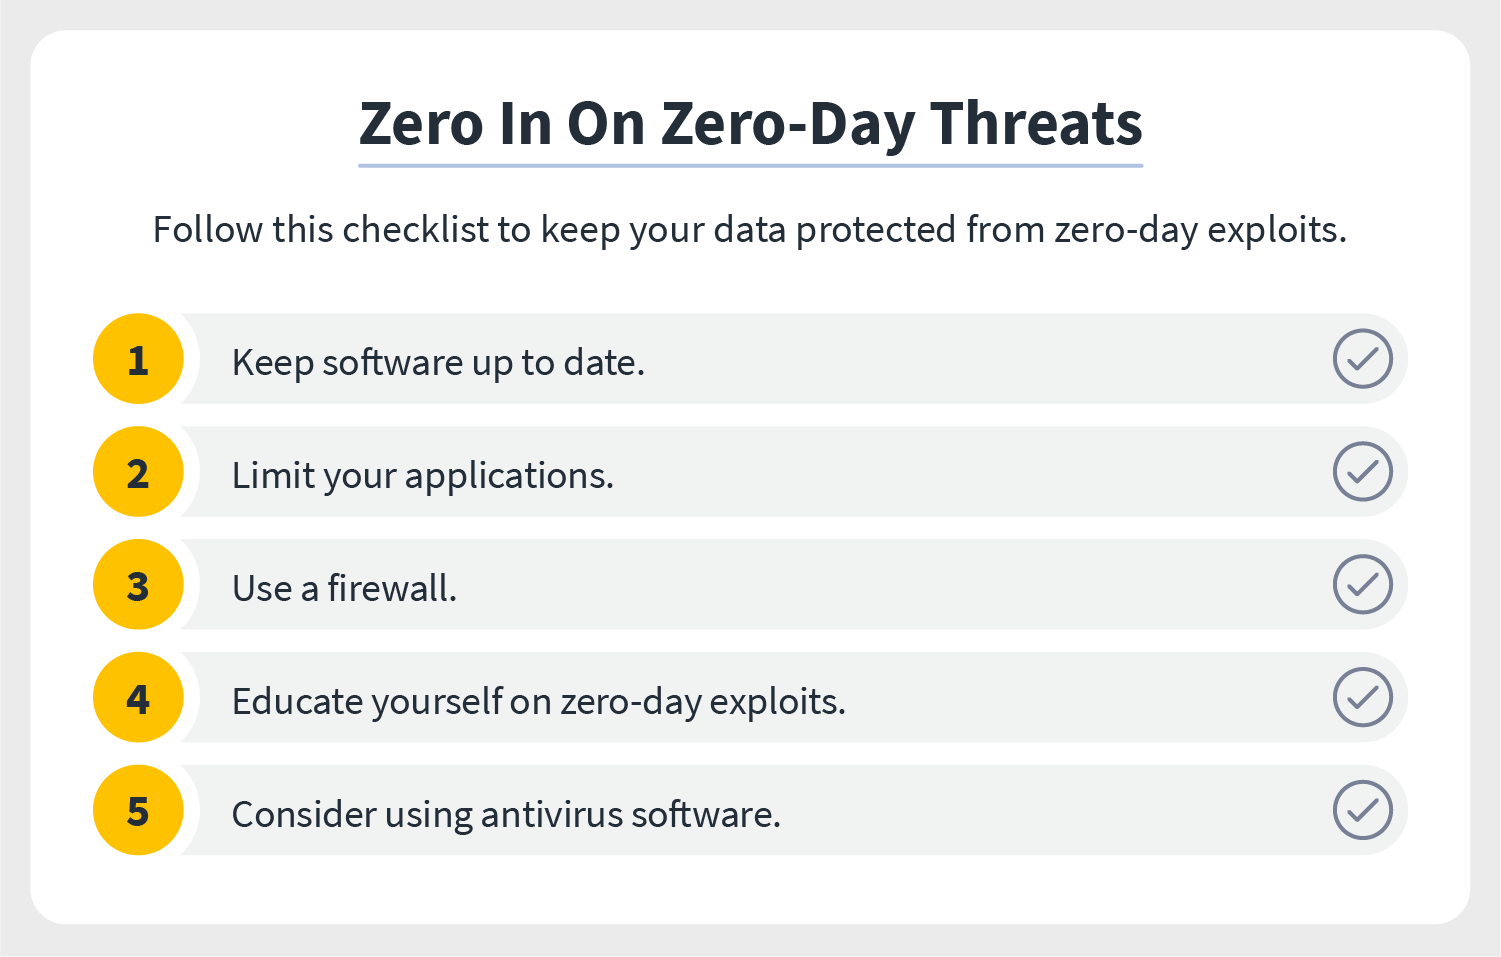 a checklist overviews five tips to avoid zero-day threats